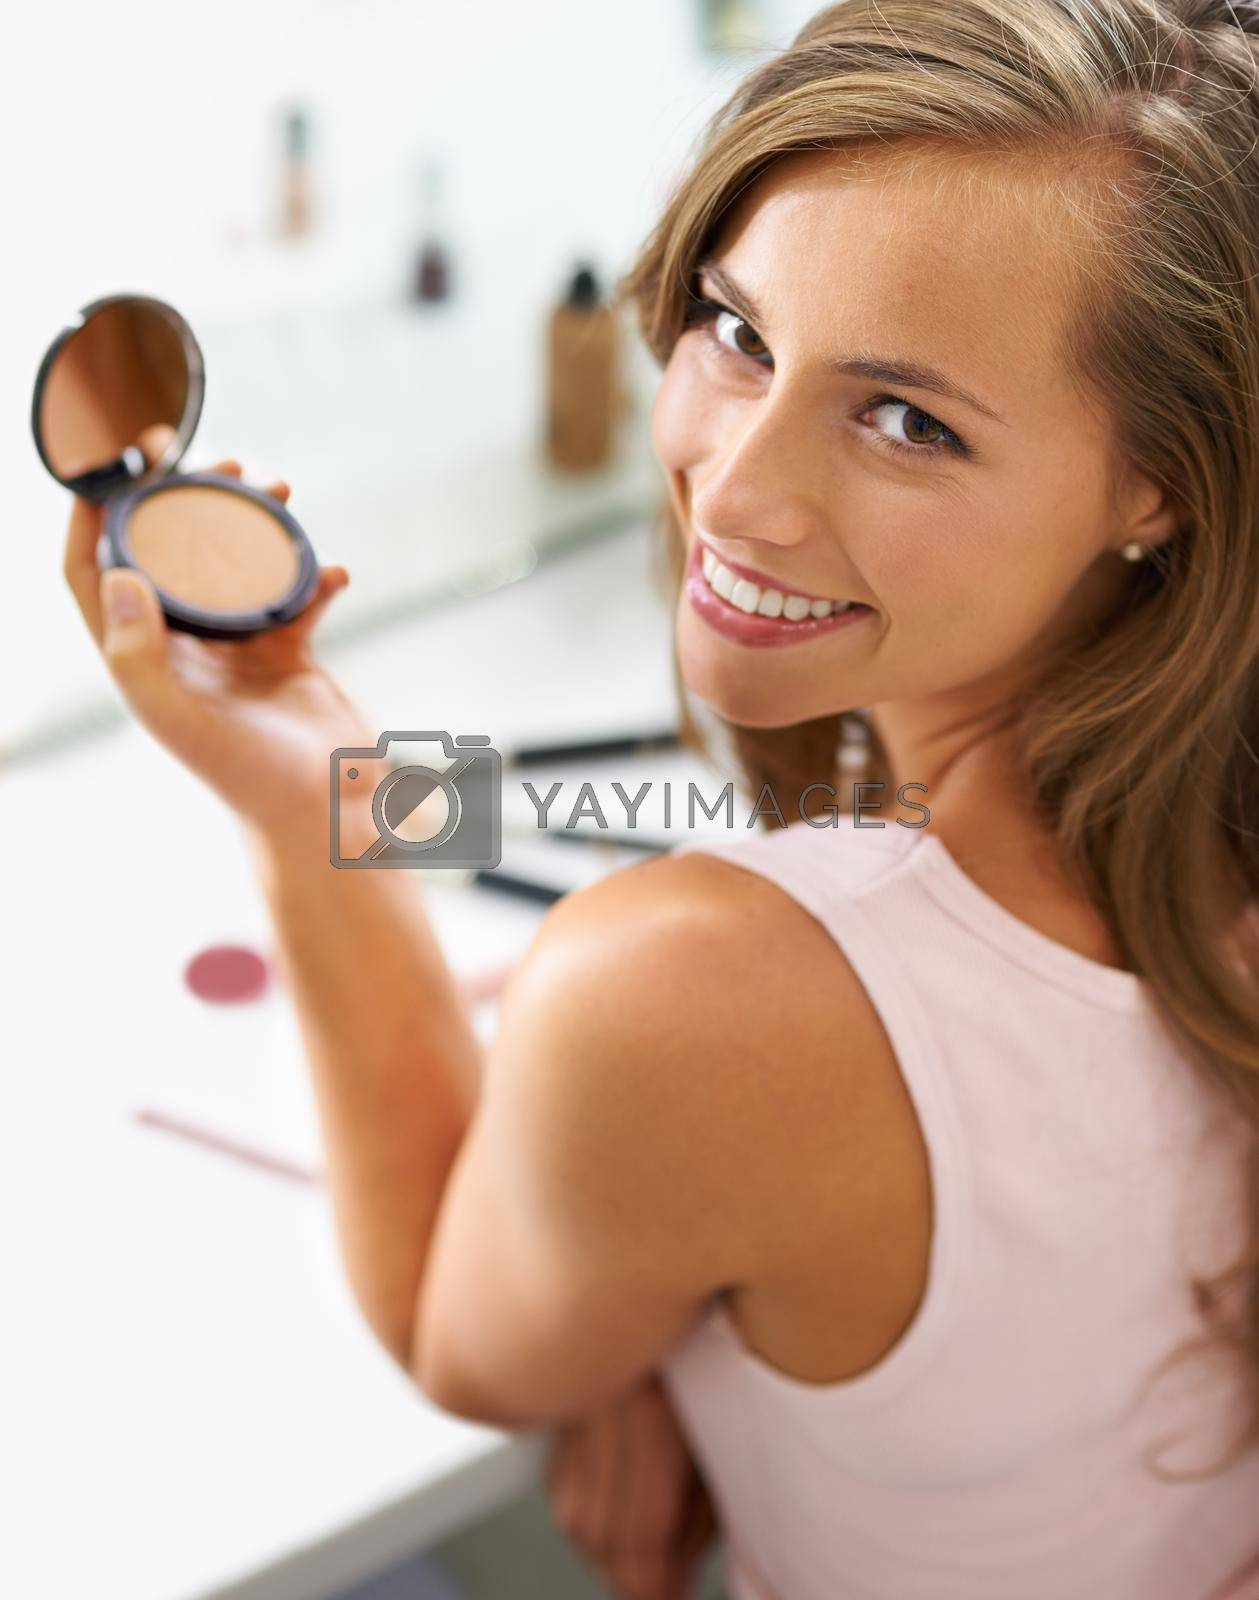 A beautiful young woman spending the day getting her hair and makeup done.